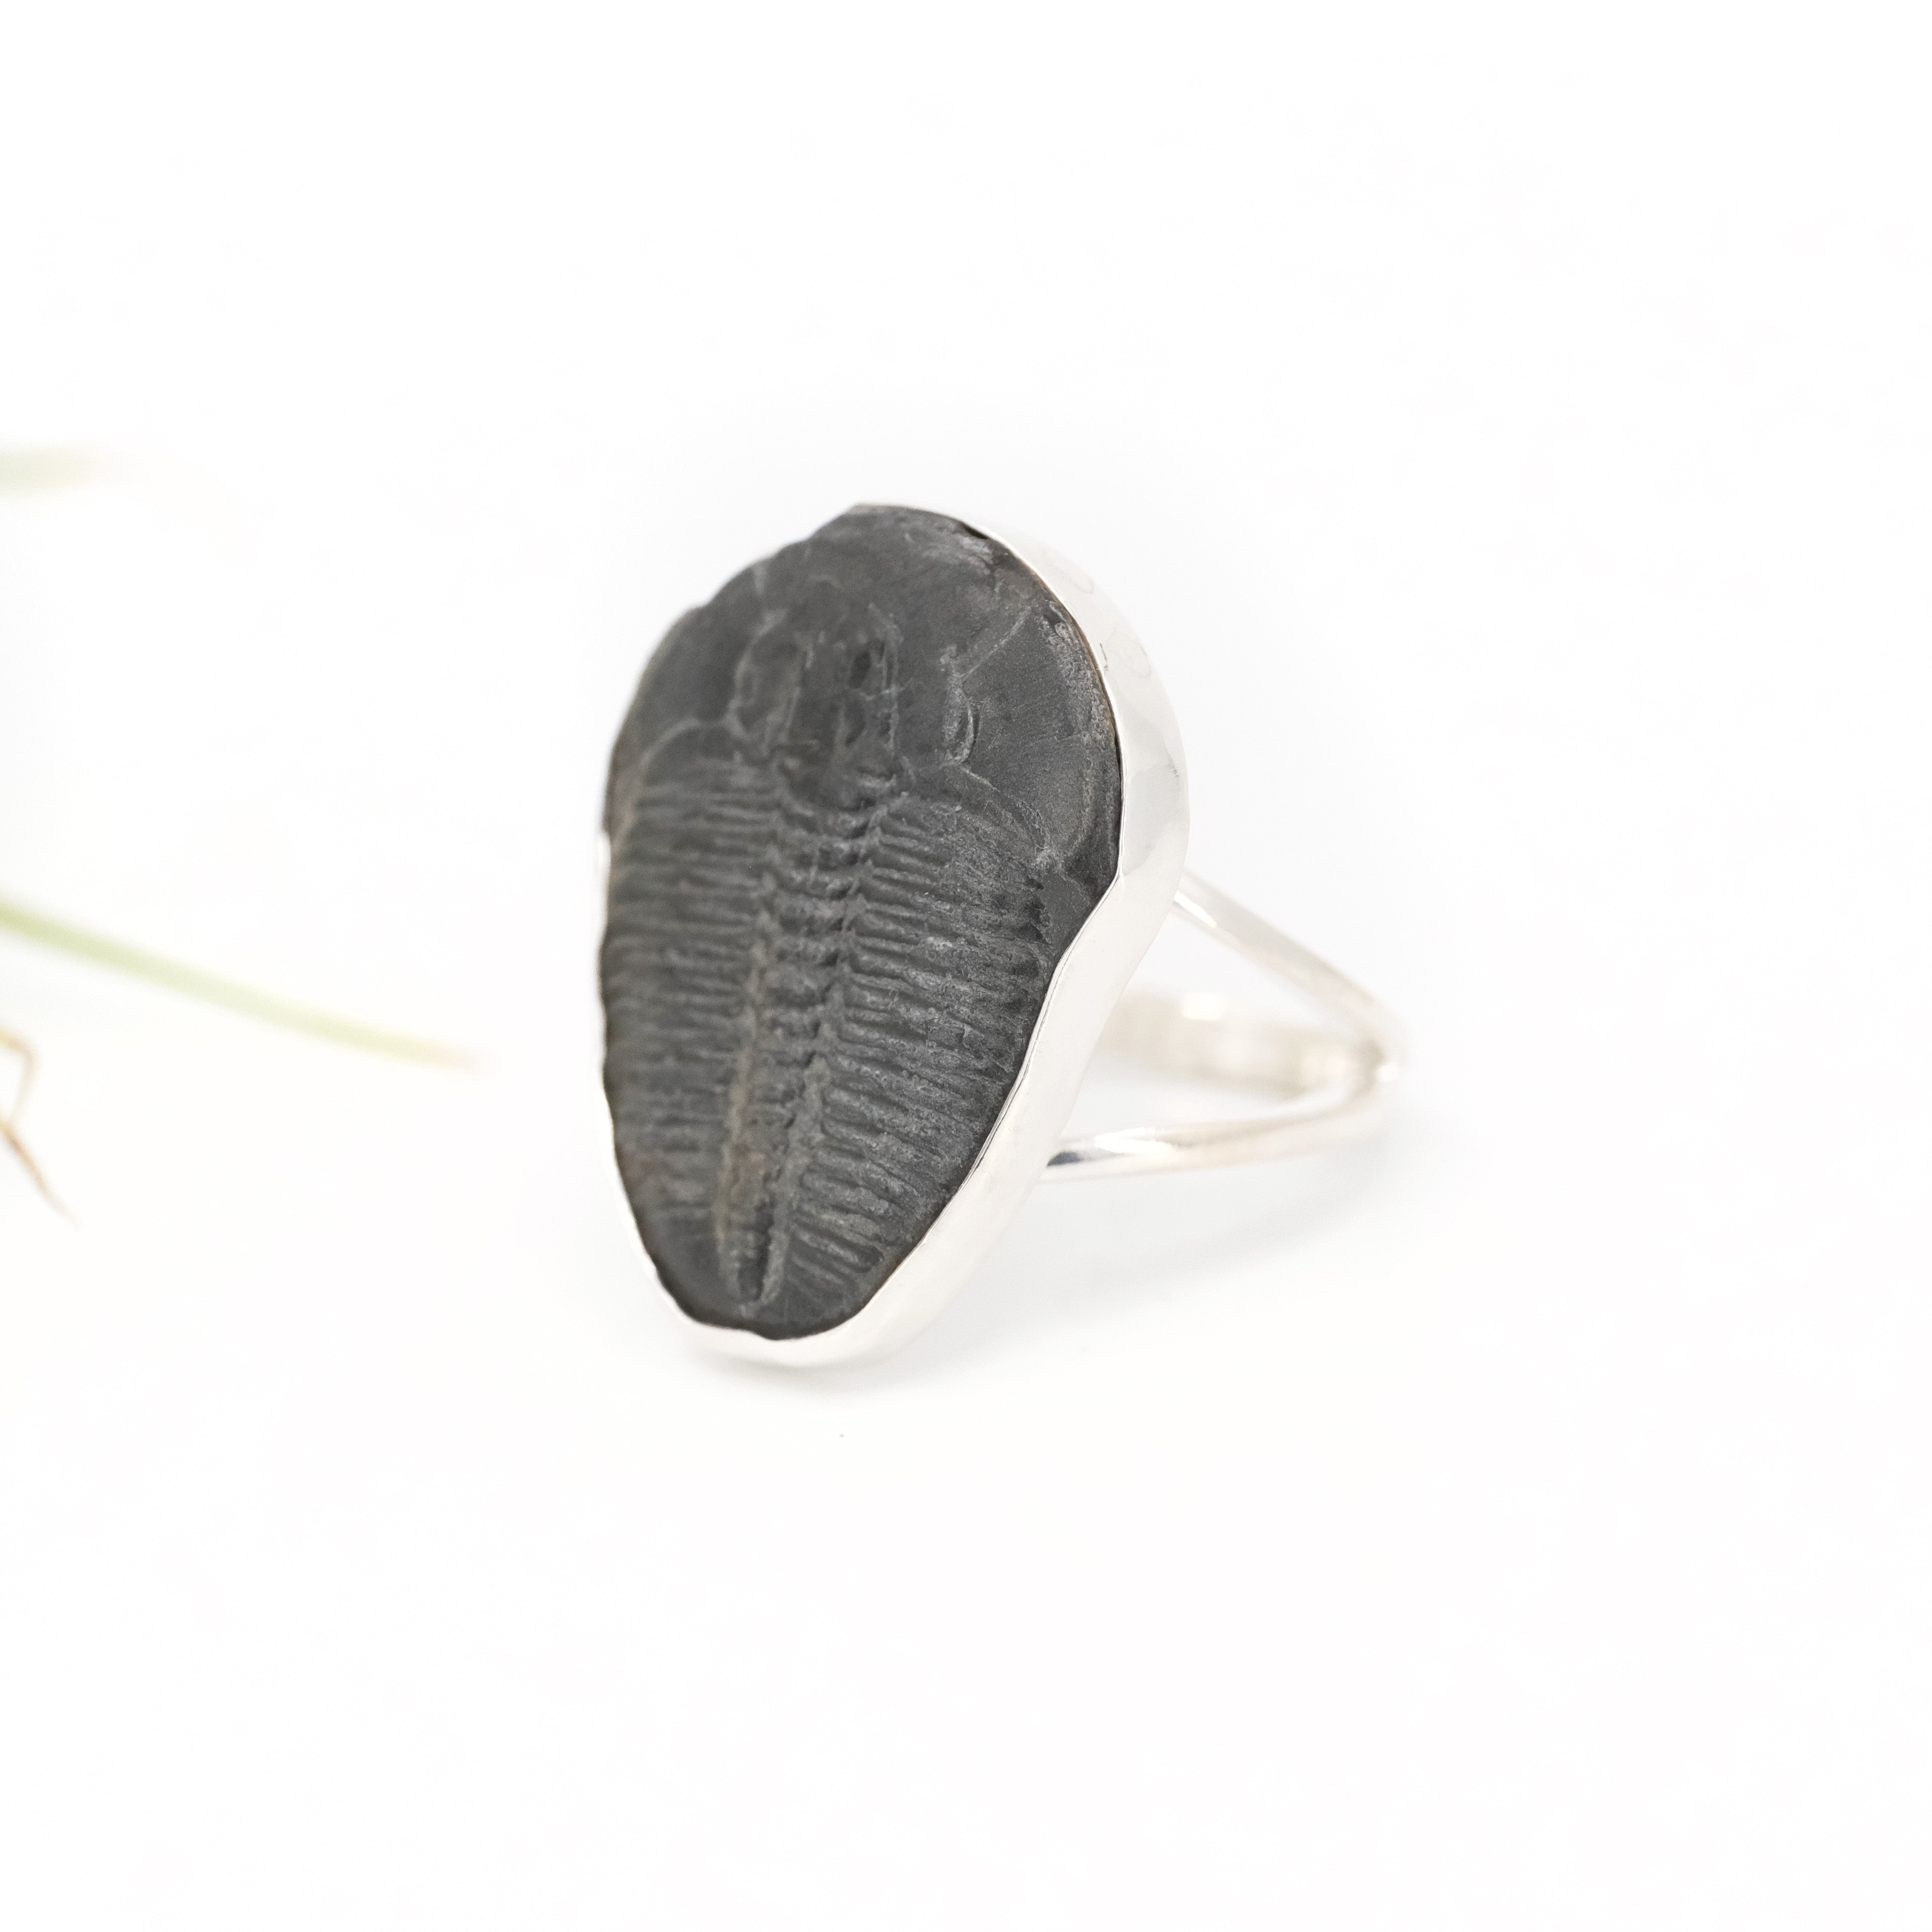 Trilobite Fossil Era Ring (Size 7.5) - One of a Kind